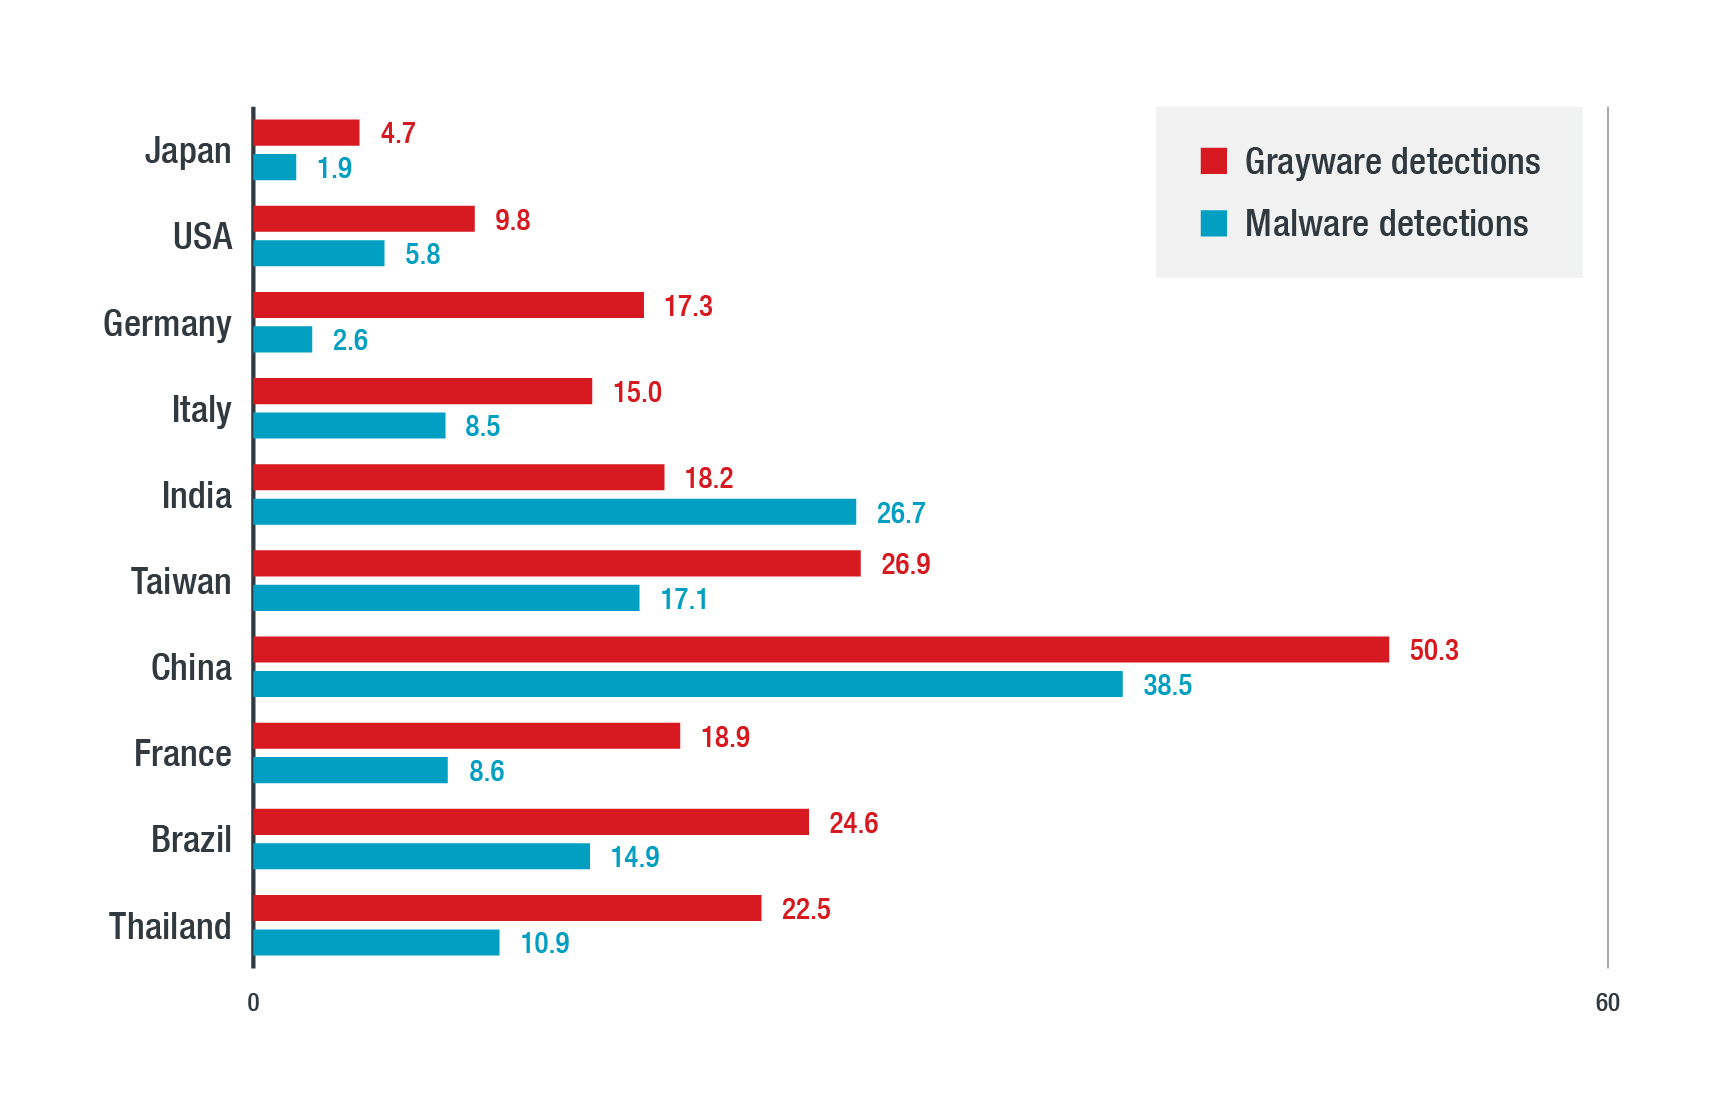 Figure 1. Top 10 countries’ percentage of ICS with malware and grayware detections